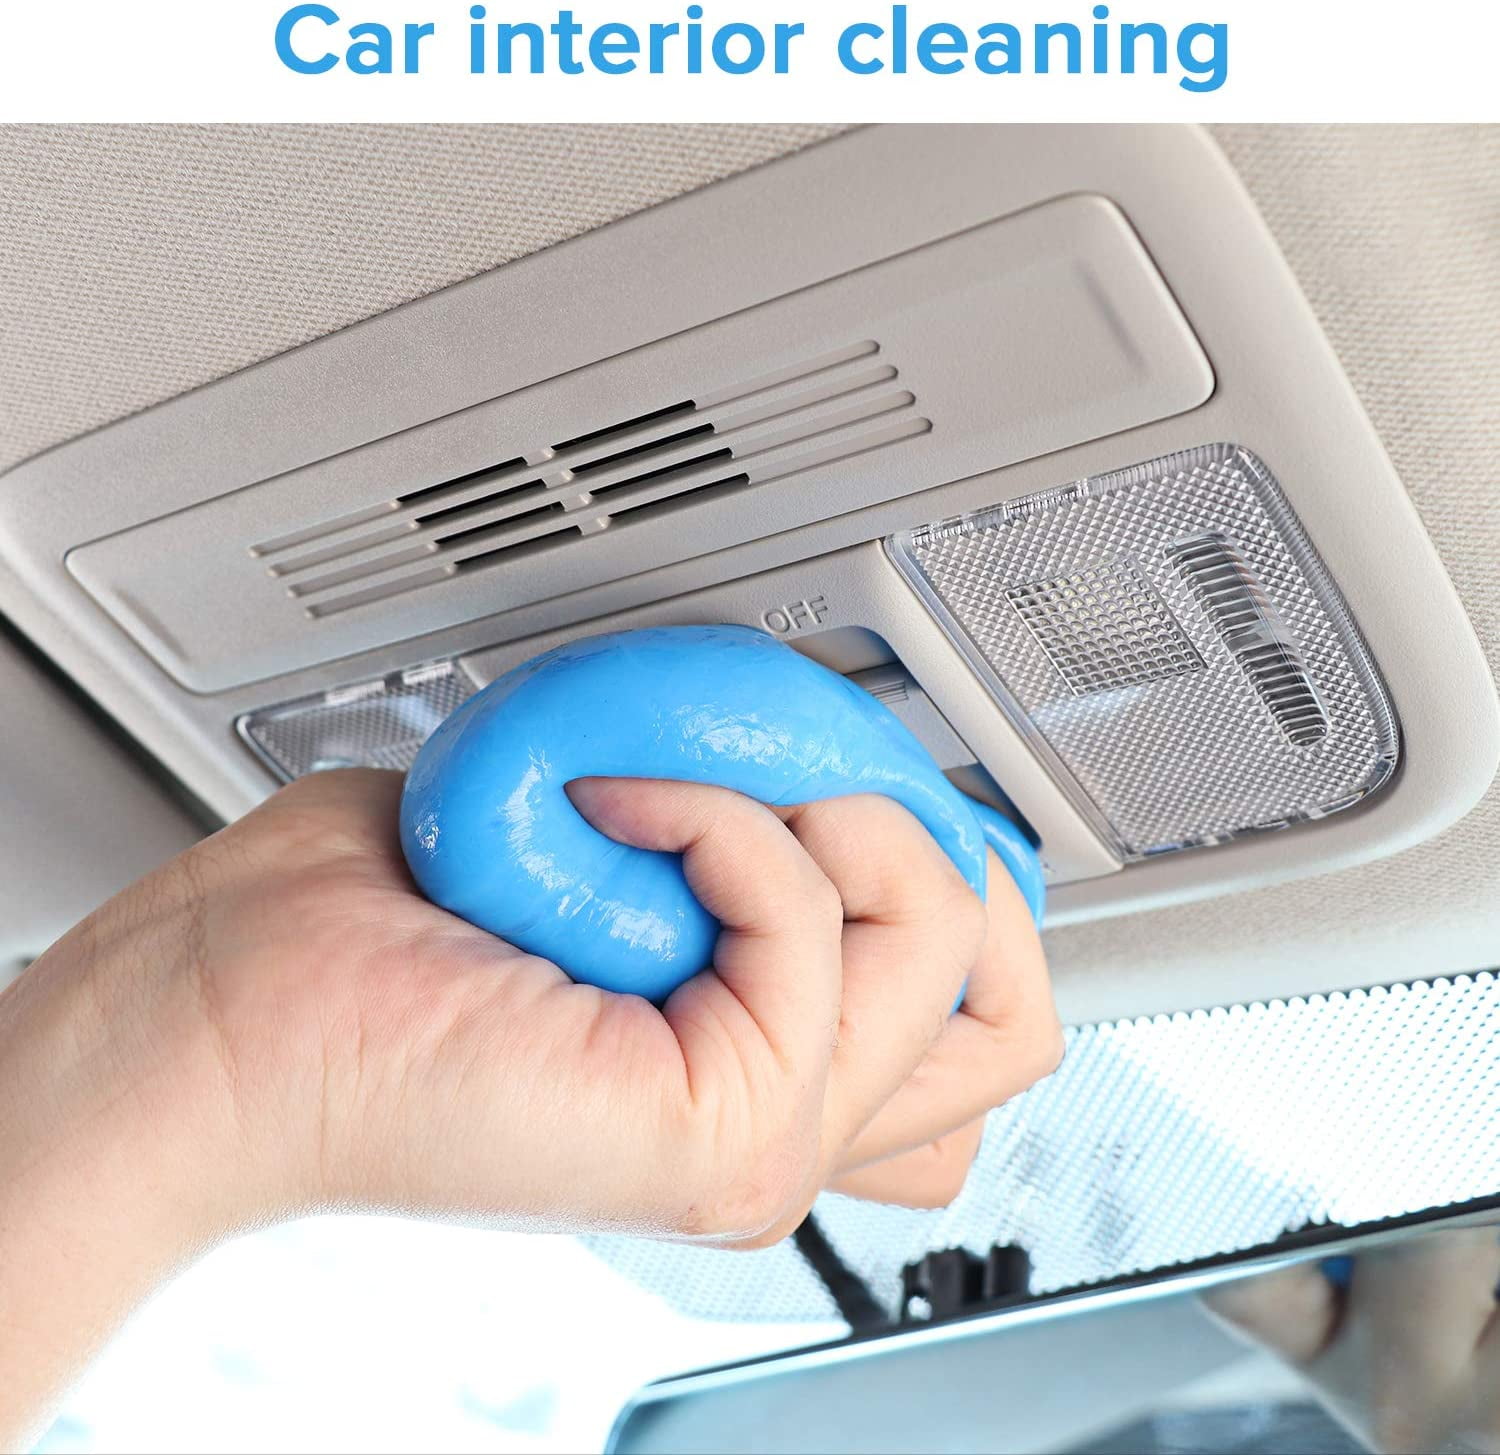 【2023 Upgraded】Cleaning Gel for Car, Car Cleaning Kit Universal Detailing  Automotive Dust Car Crevice Cleaner Auto Air Vent Interior Detail Removal